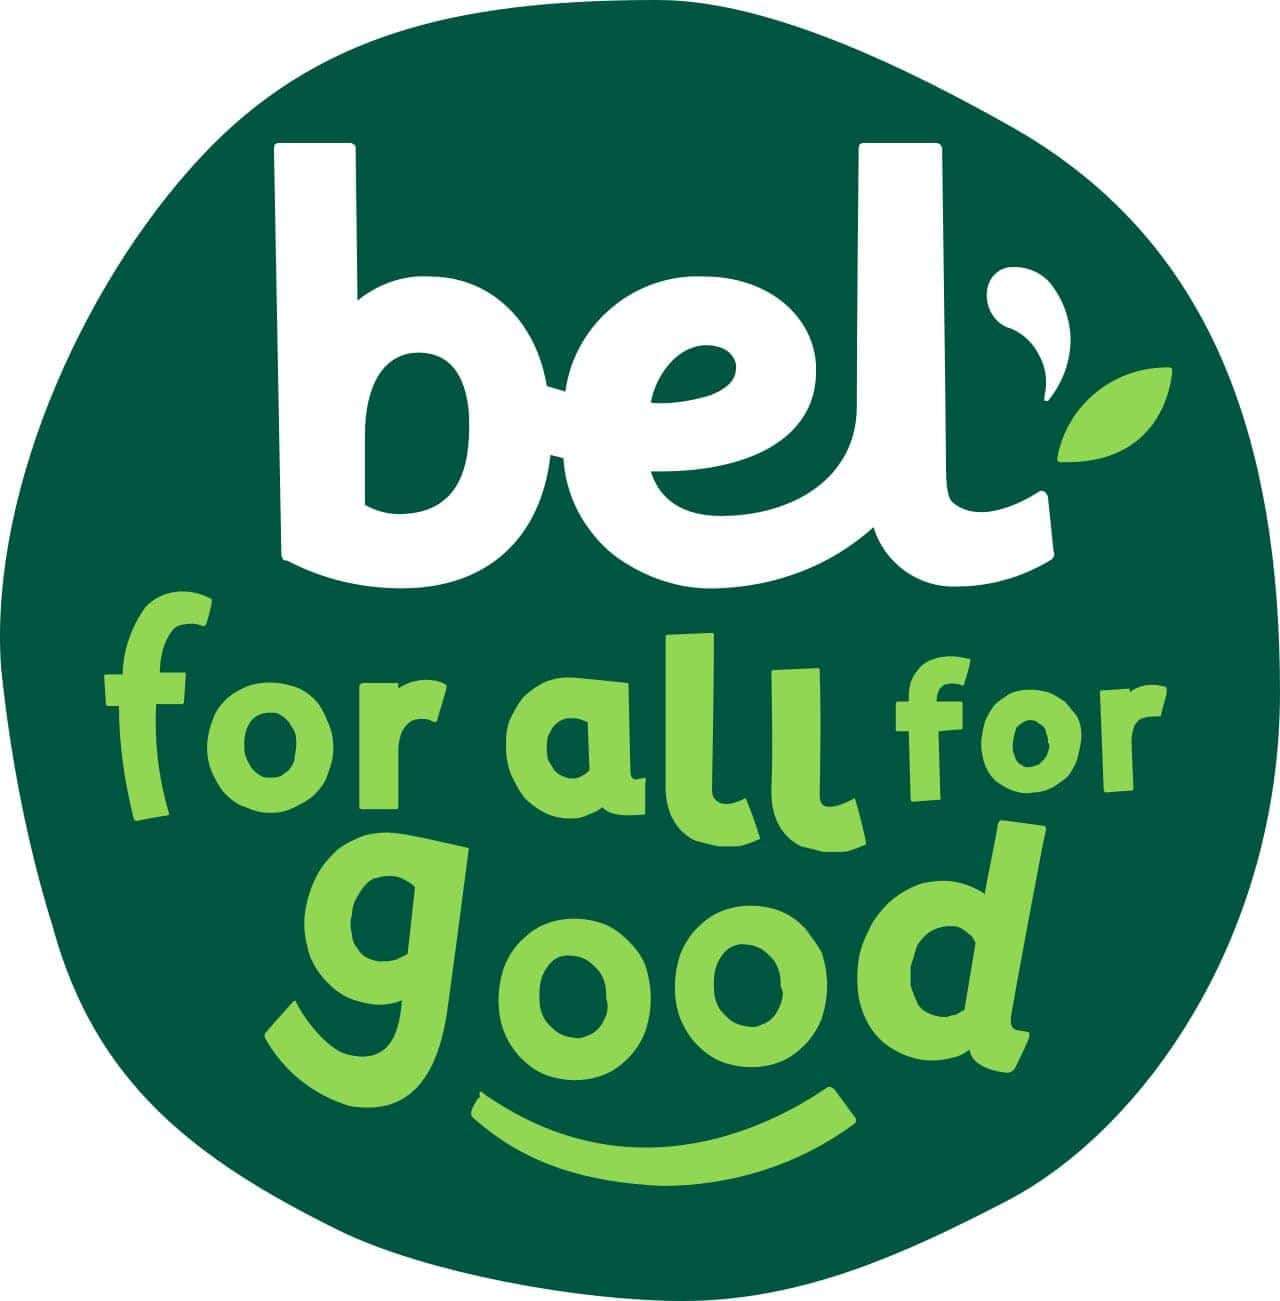 Logo of Bel one of our partners